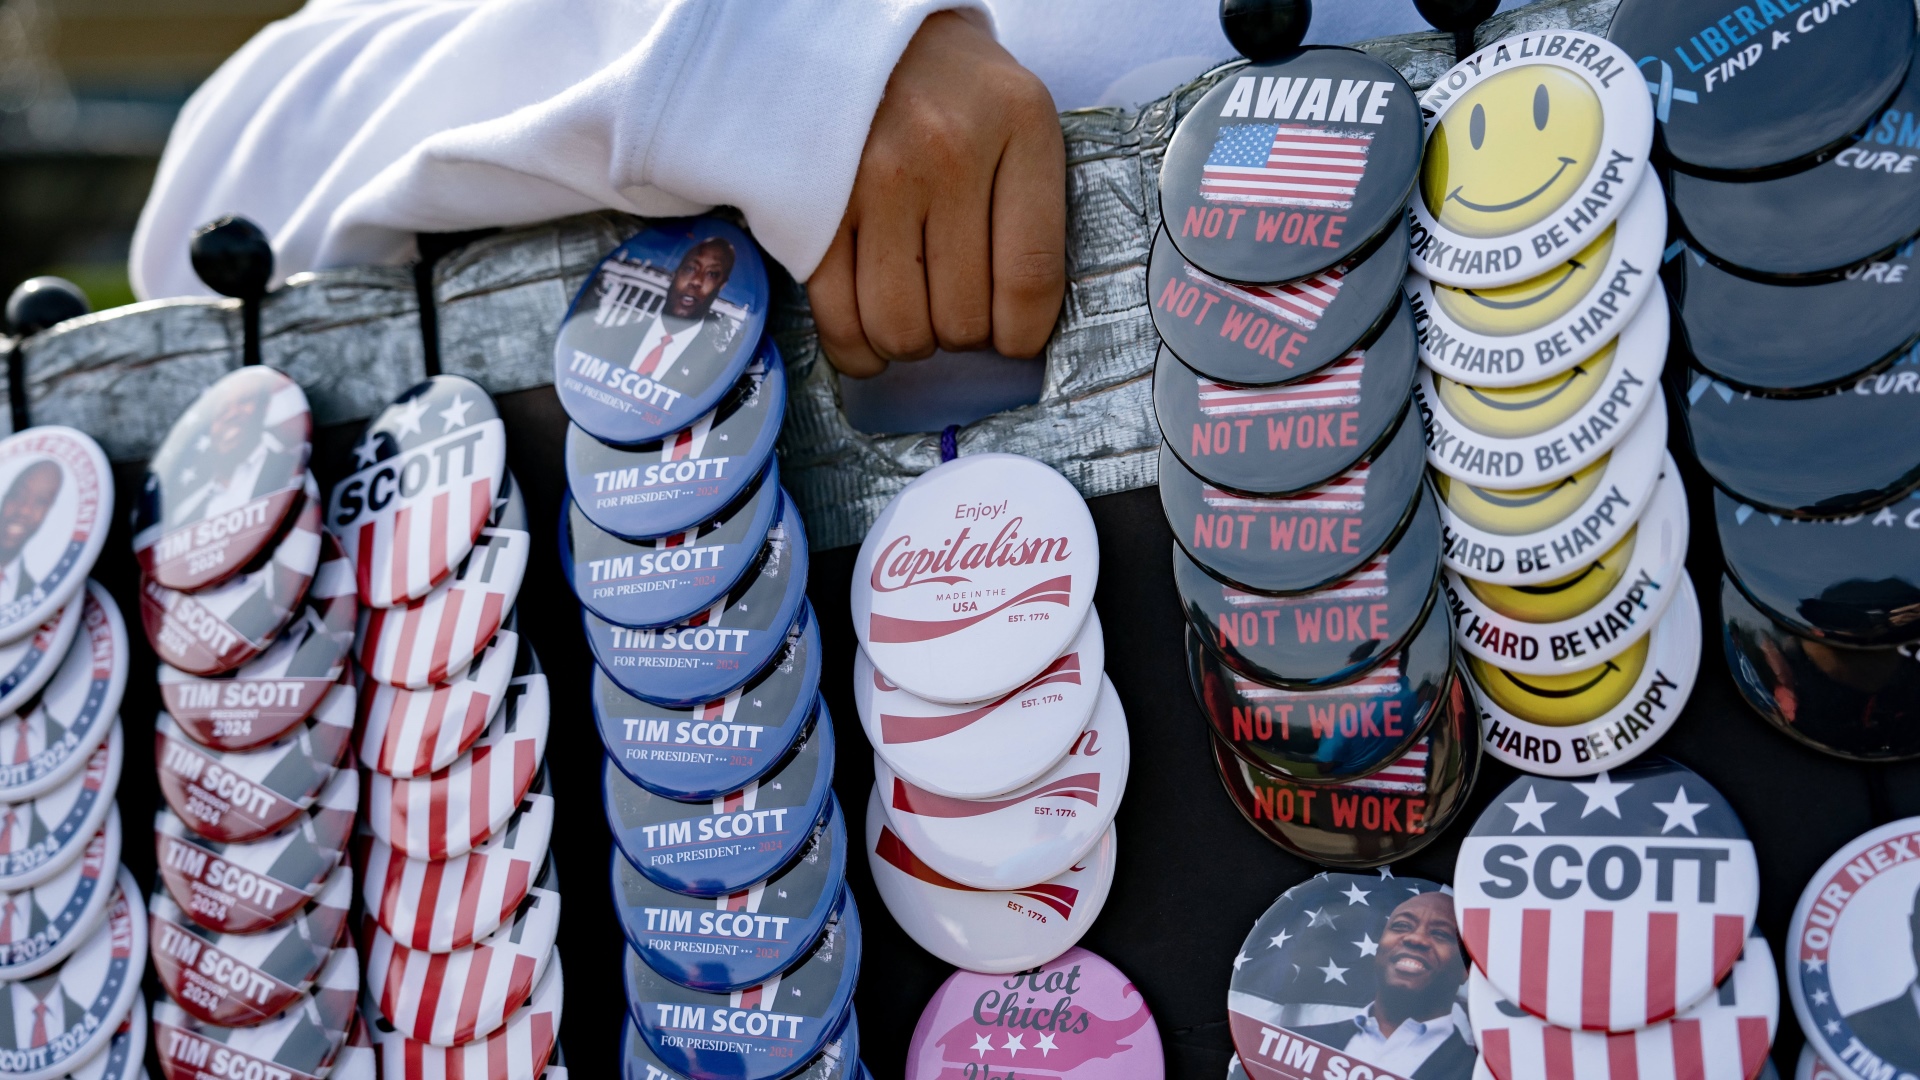 Badges for sale prior to an event for senator Tim Scott on May 22 in North Charleston, South Carolina. Photo: Allison Joyce/Getty